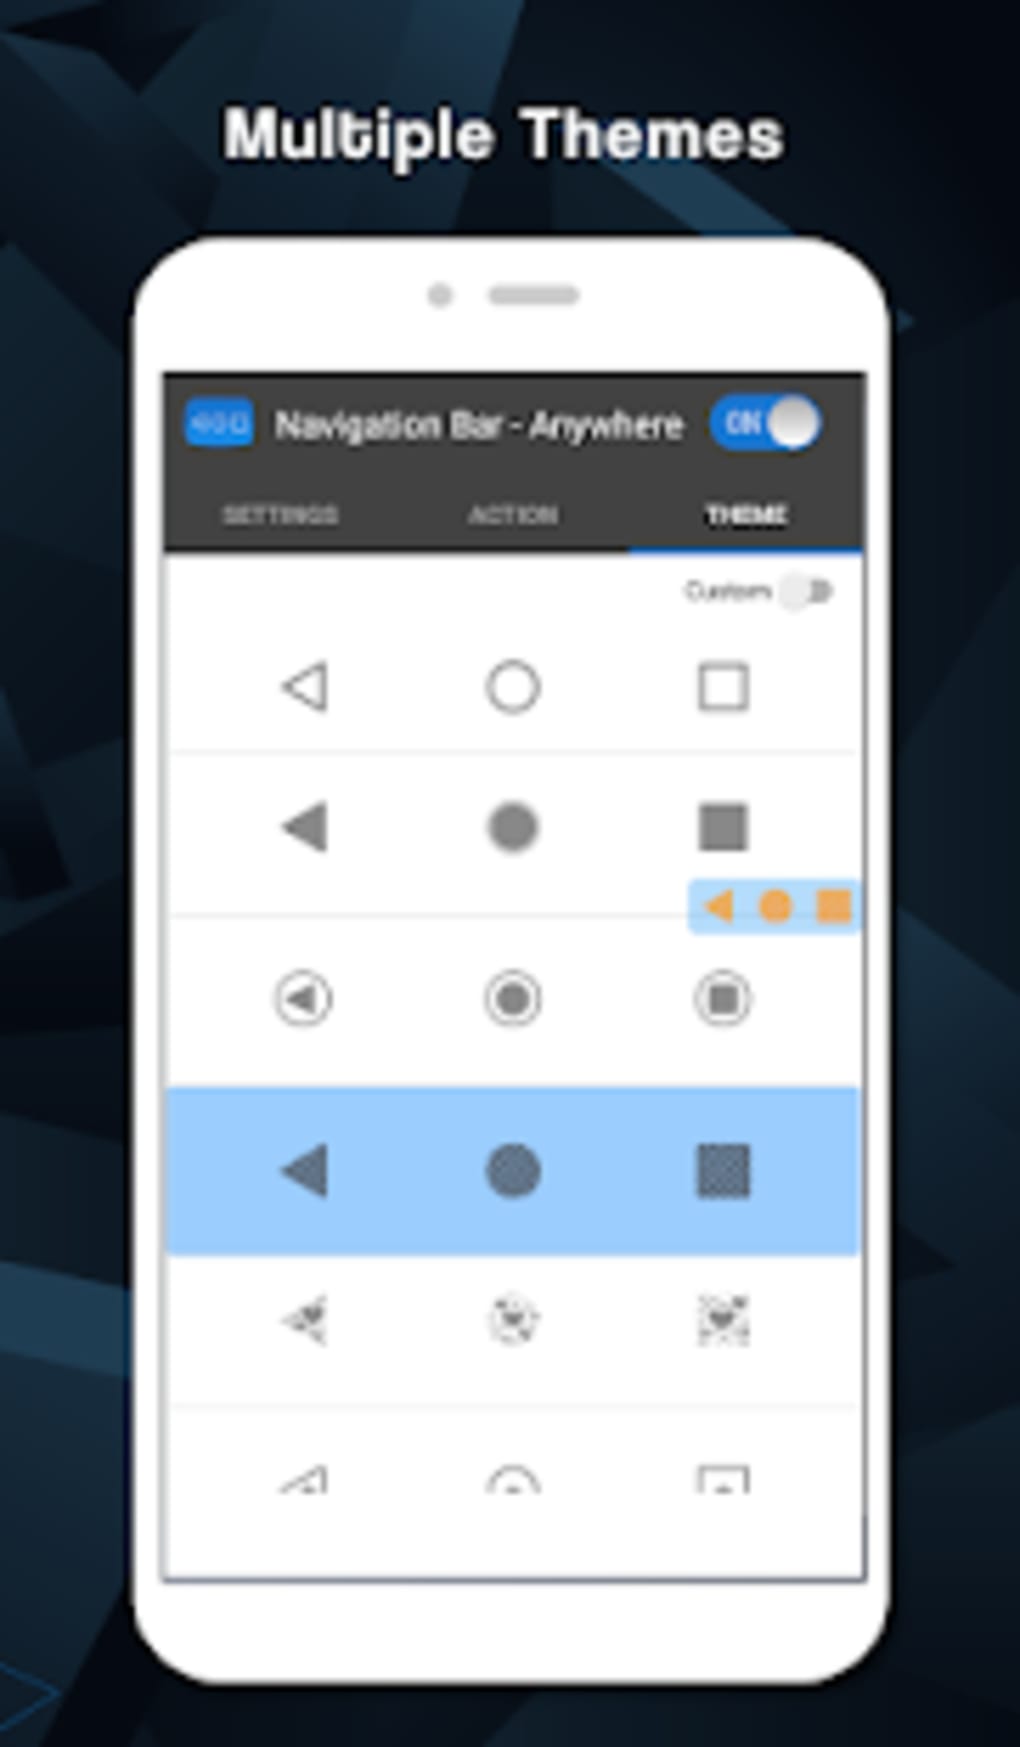 Navigation Bar - Anywhere Apk For Android - Download